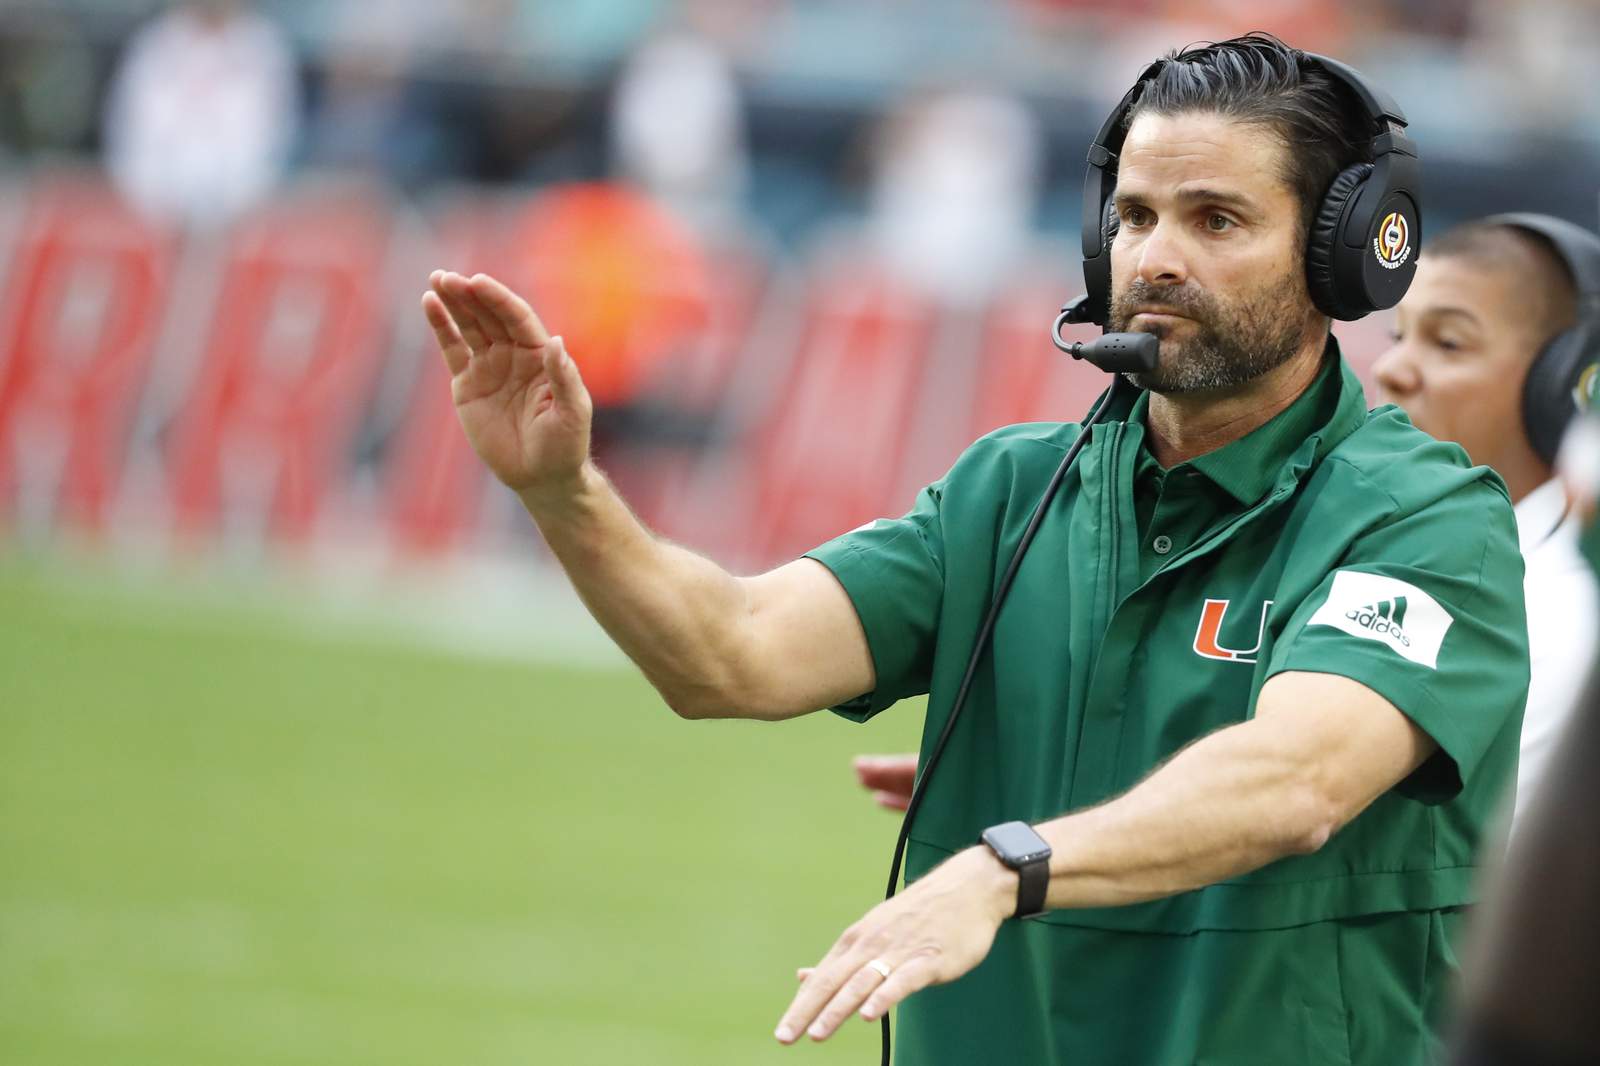 AP Interview: Manny Diaz believes Miami is already better